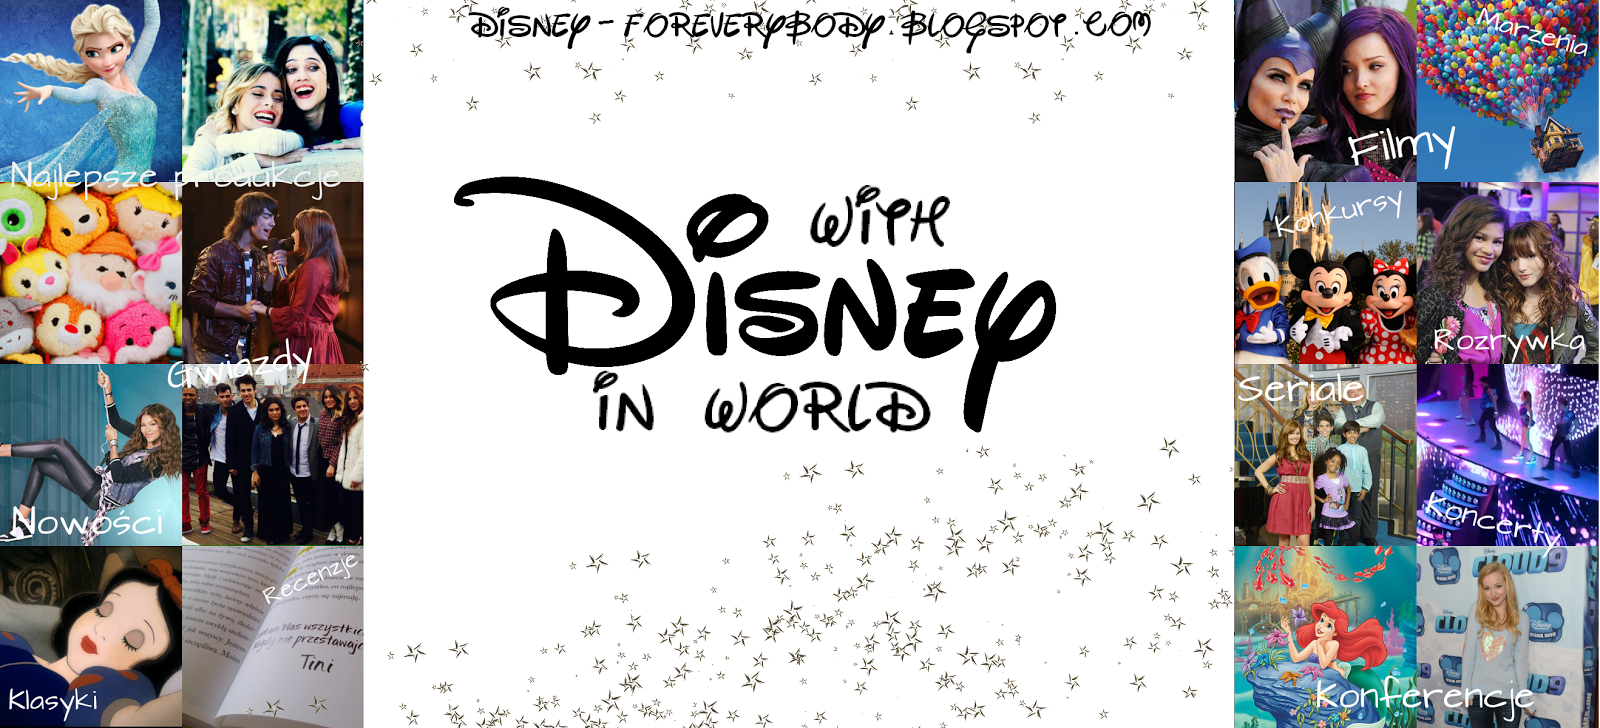 With Disney in world